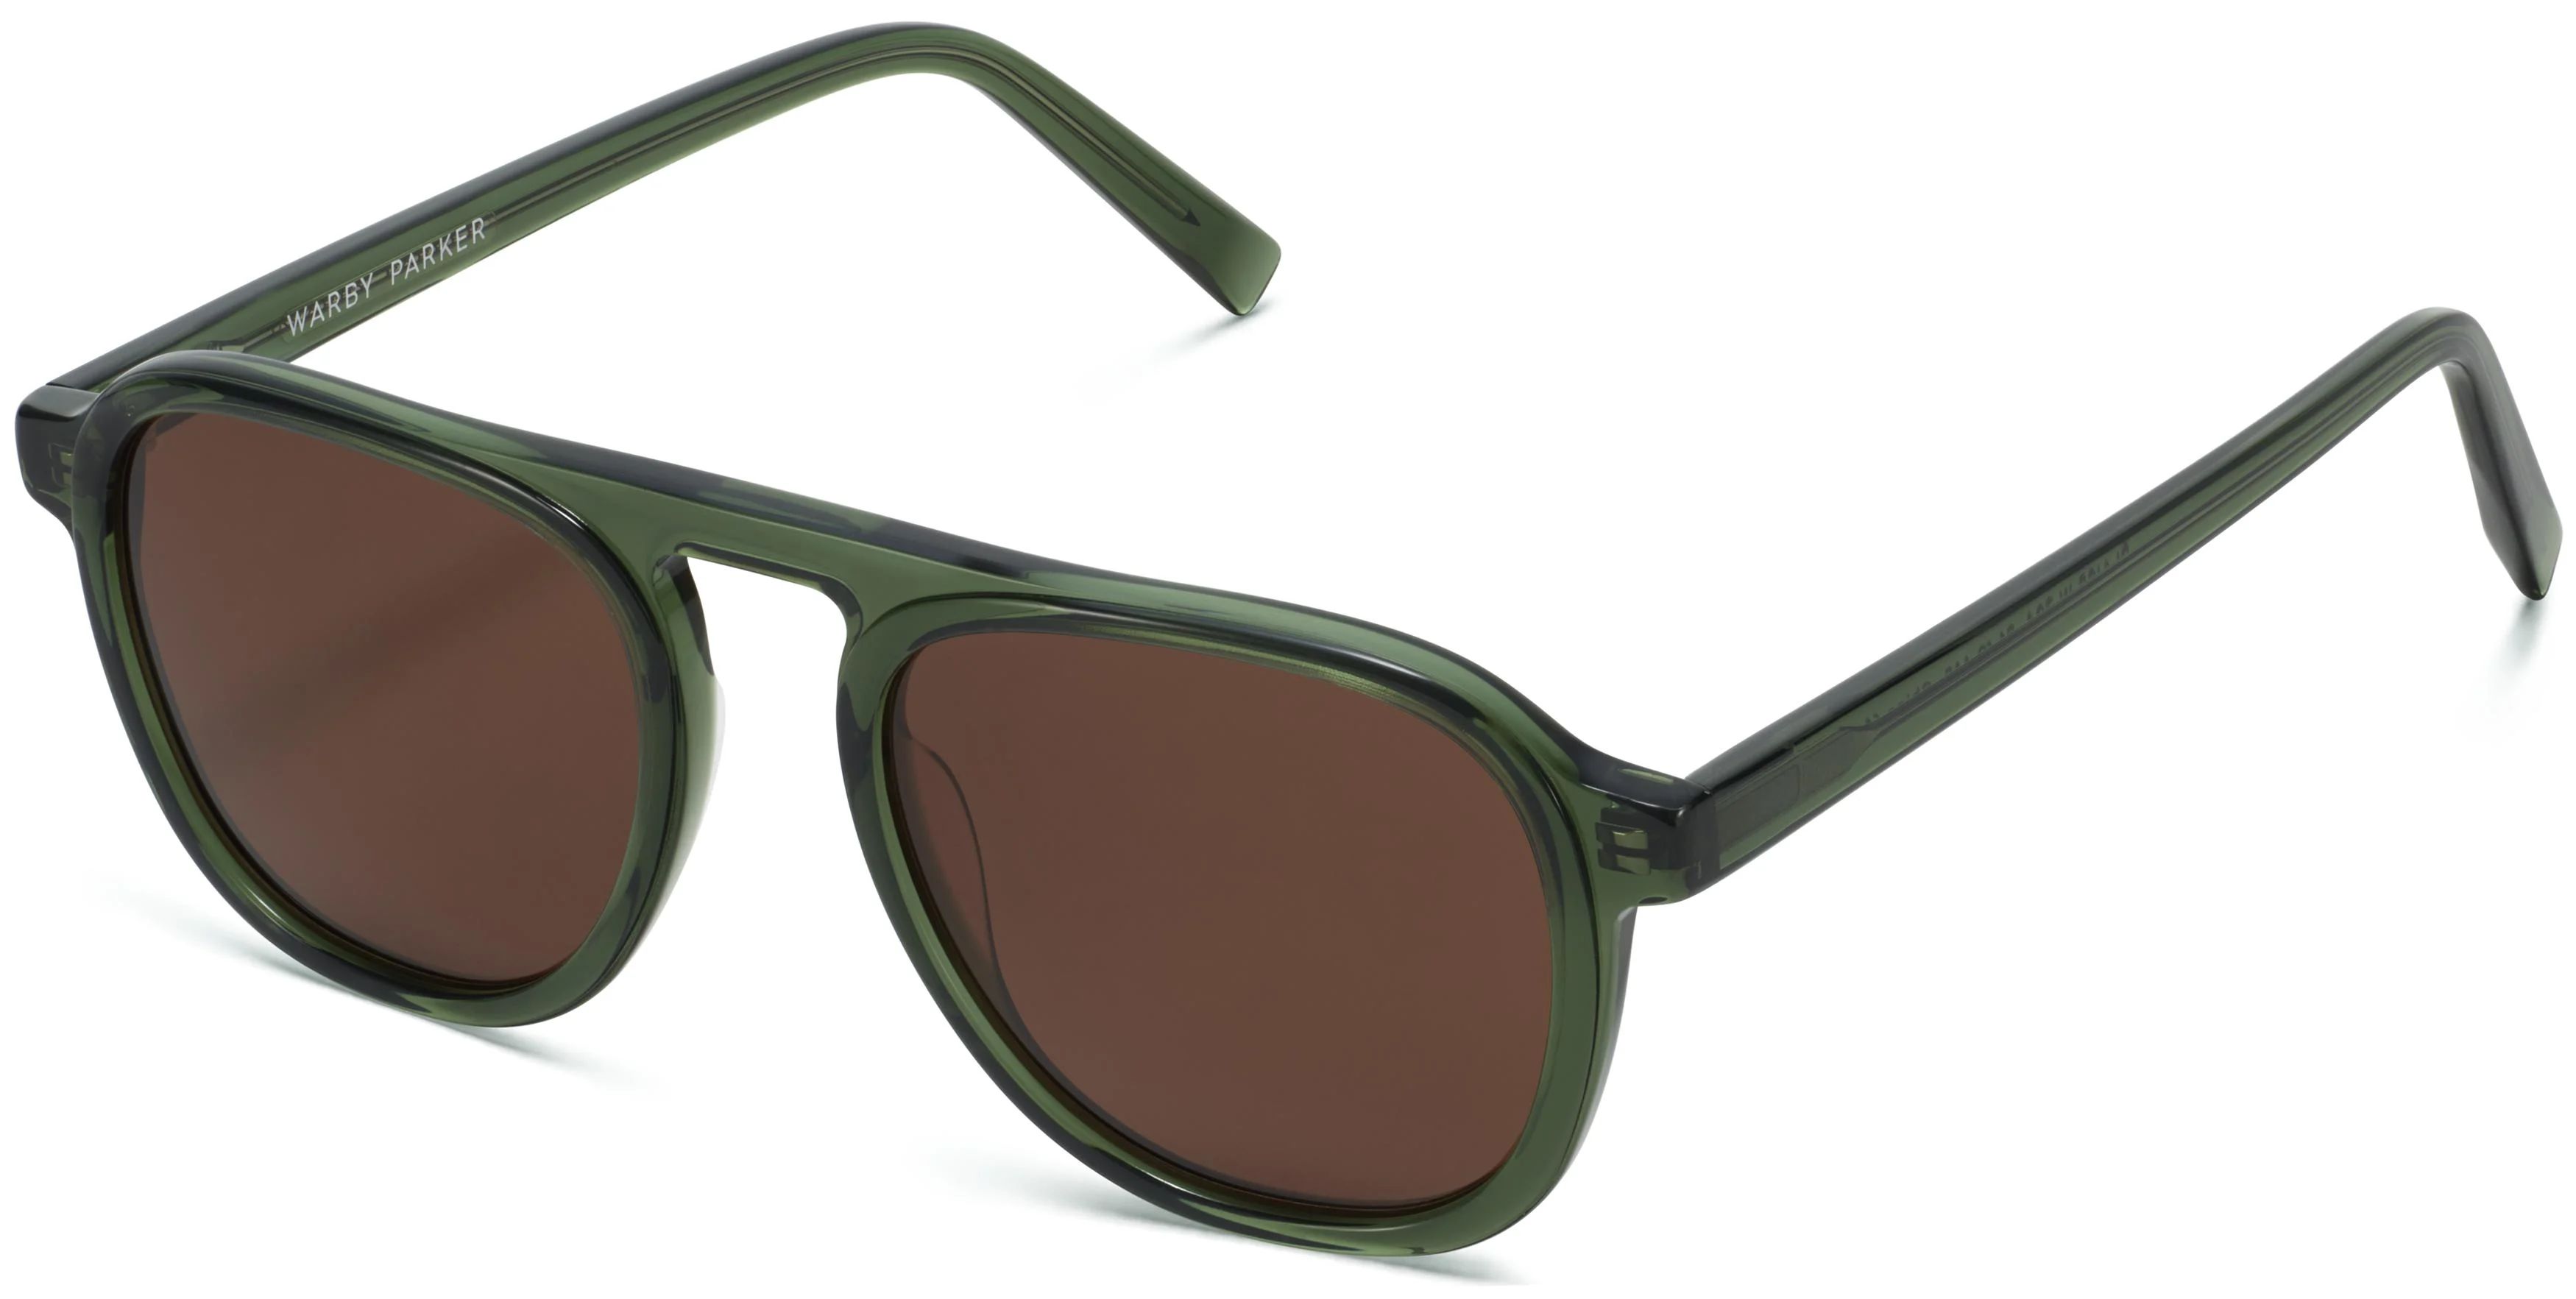 Blaise Sunglasses in Palm Crystal | Warby Parker | Warby Parker (US)